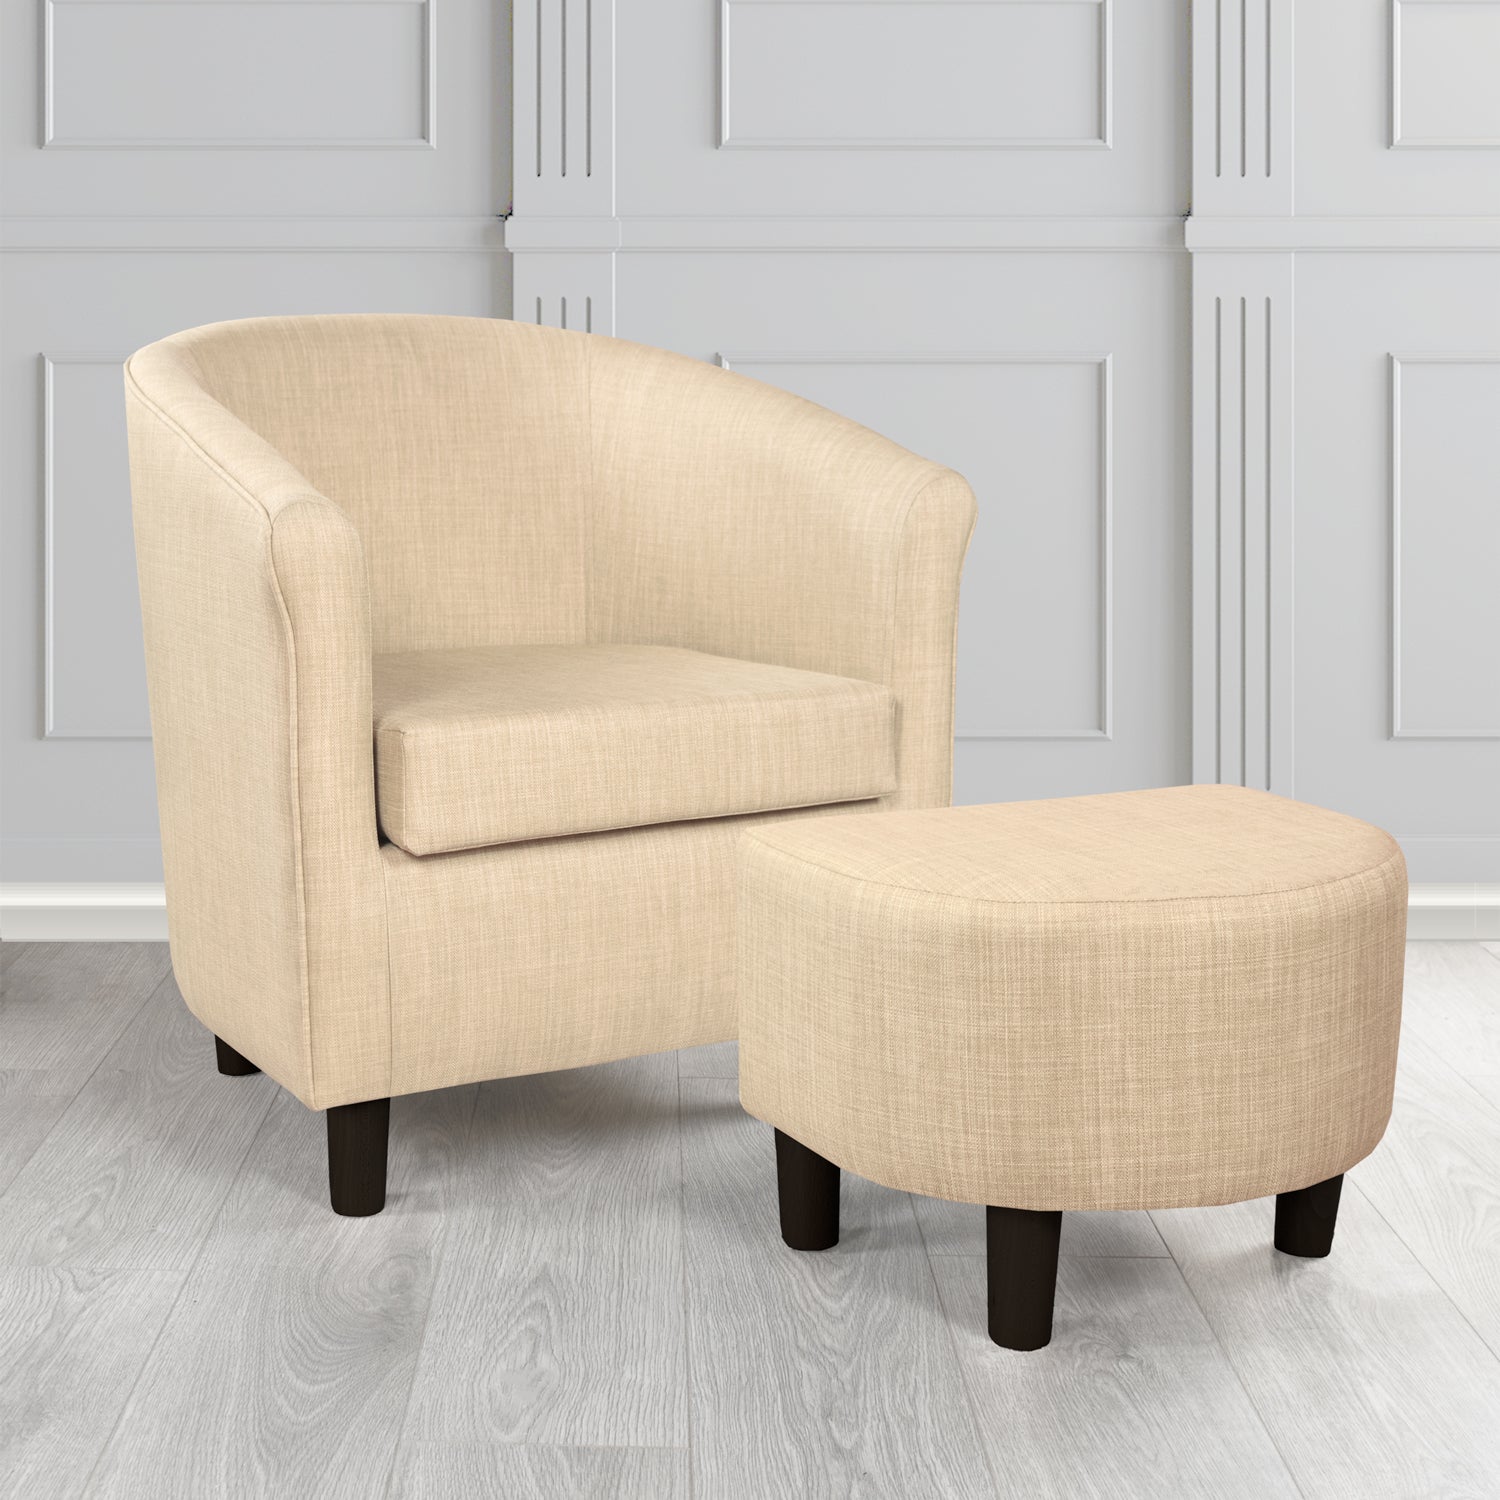 Tuscany Charles Pearl Linen Plain Fabric Tub Chair with Dee Footstool Set - The Tub Chair Shop